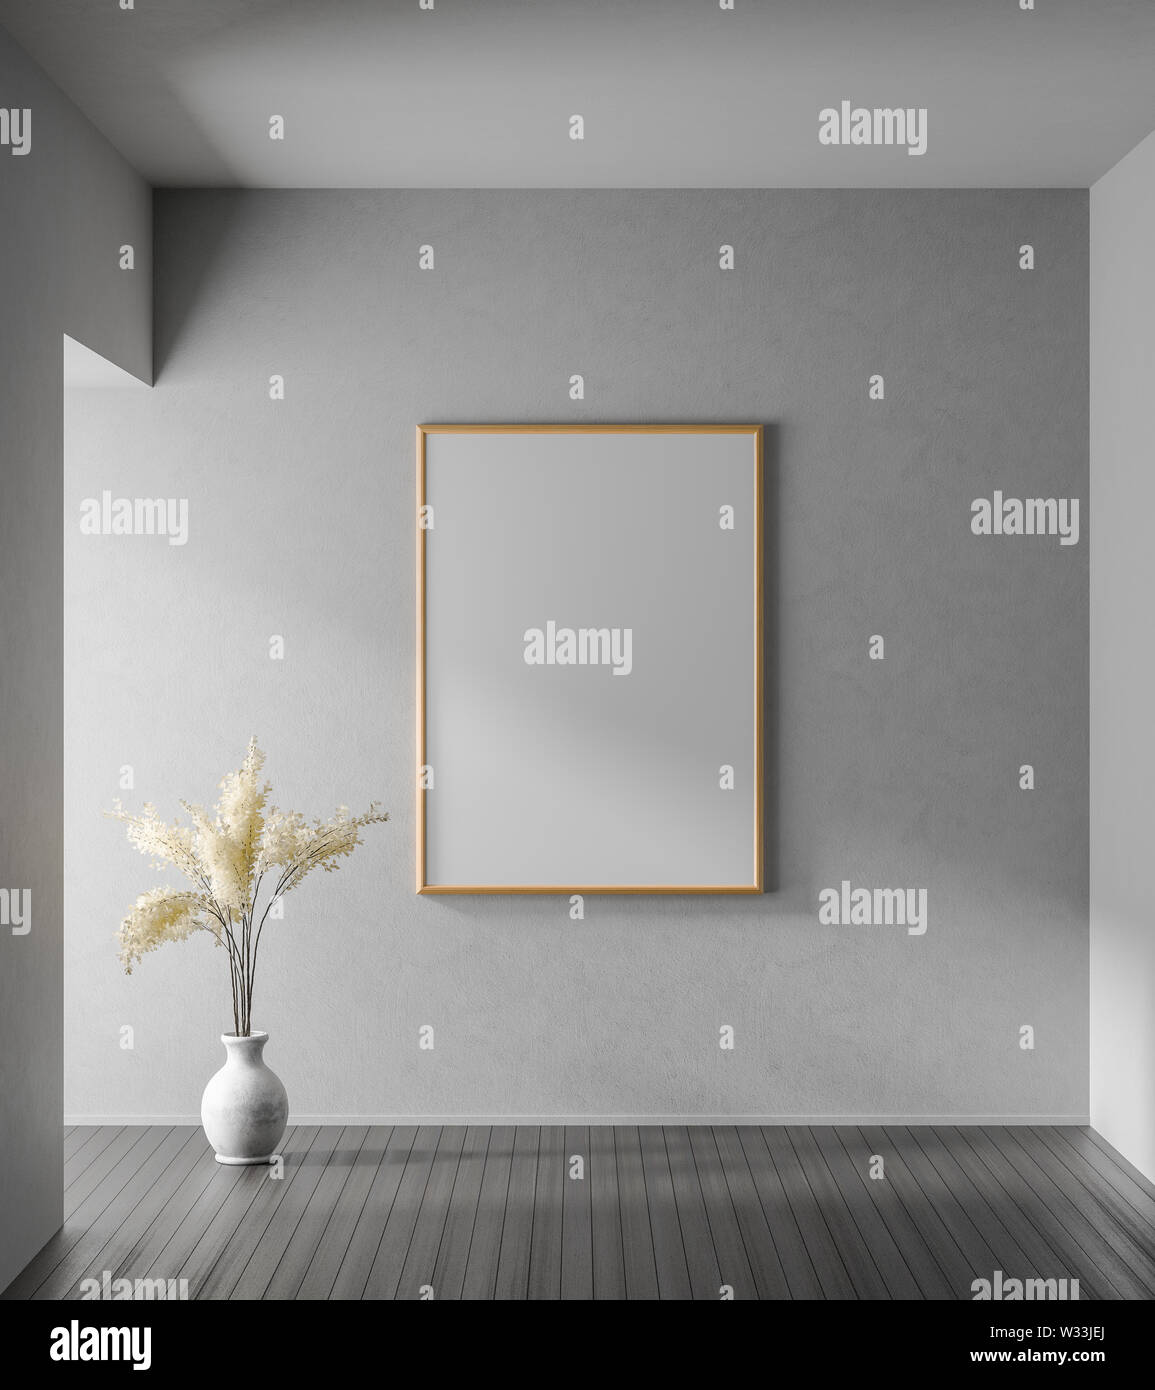 Mock up poster frame in modern interior with concrete walls. Minimalist room design. 3D illustration. Stock Photo